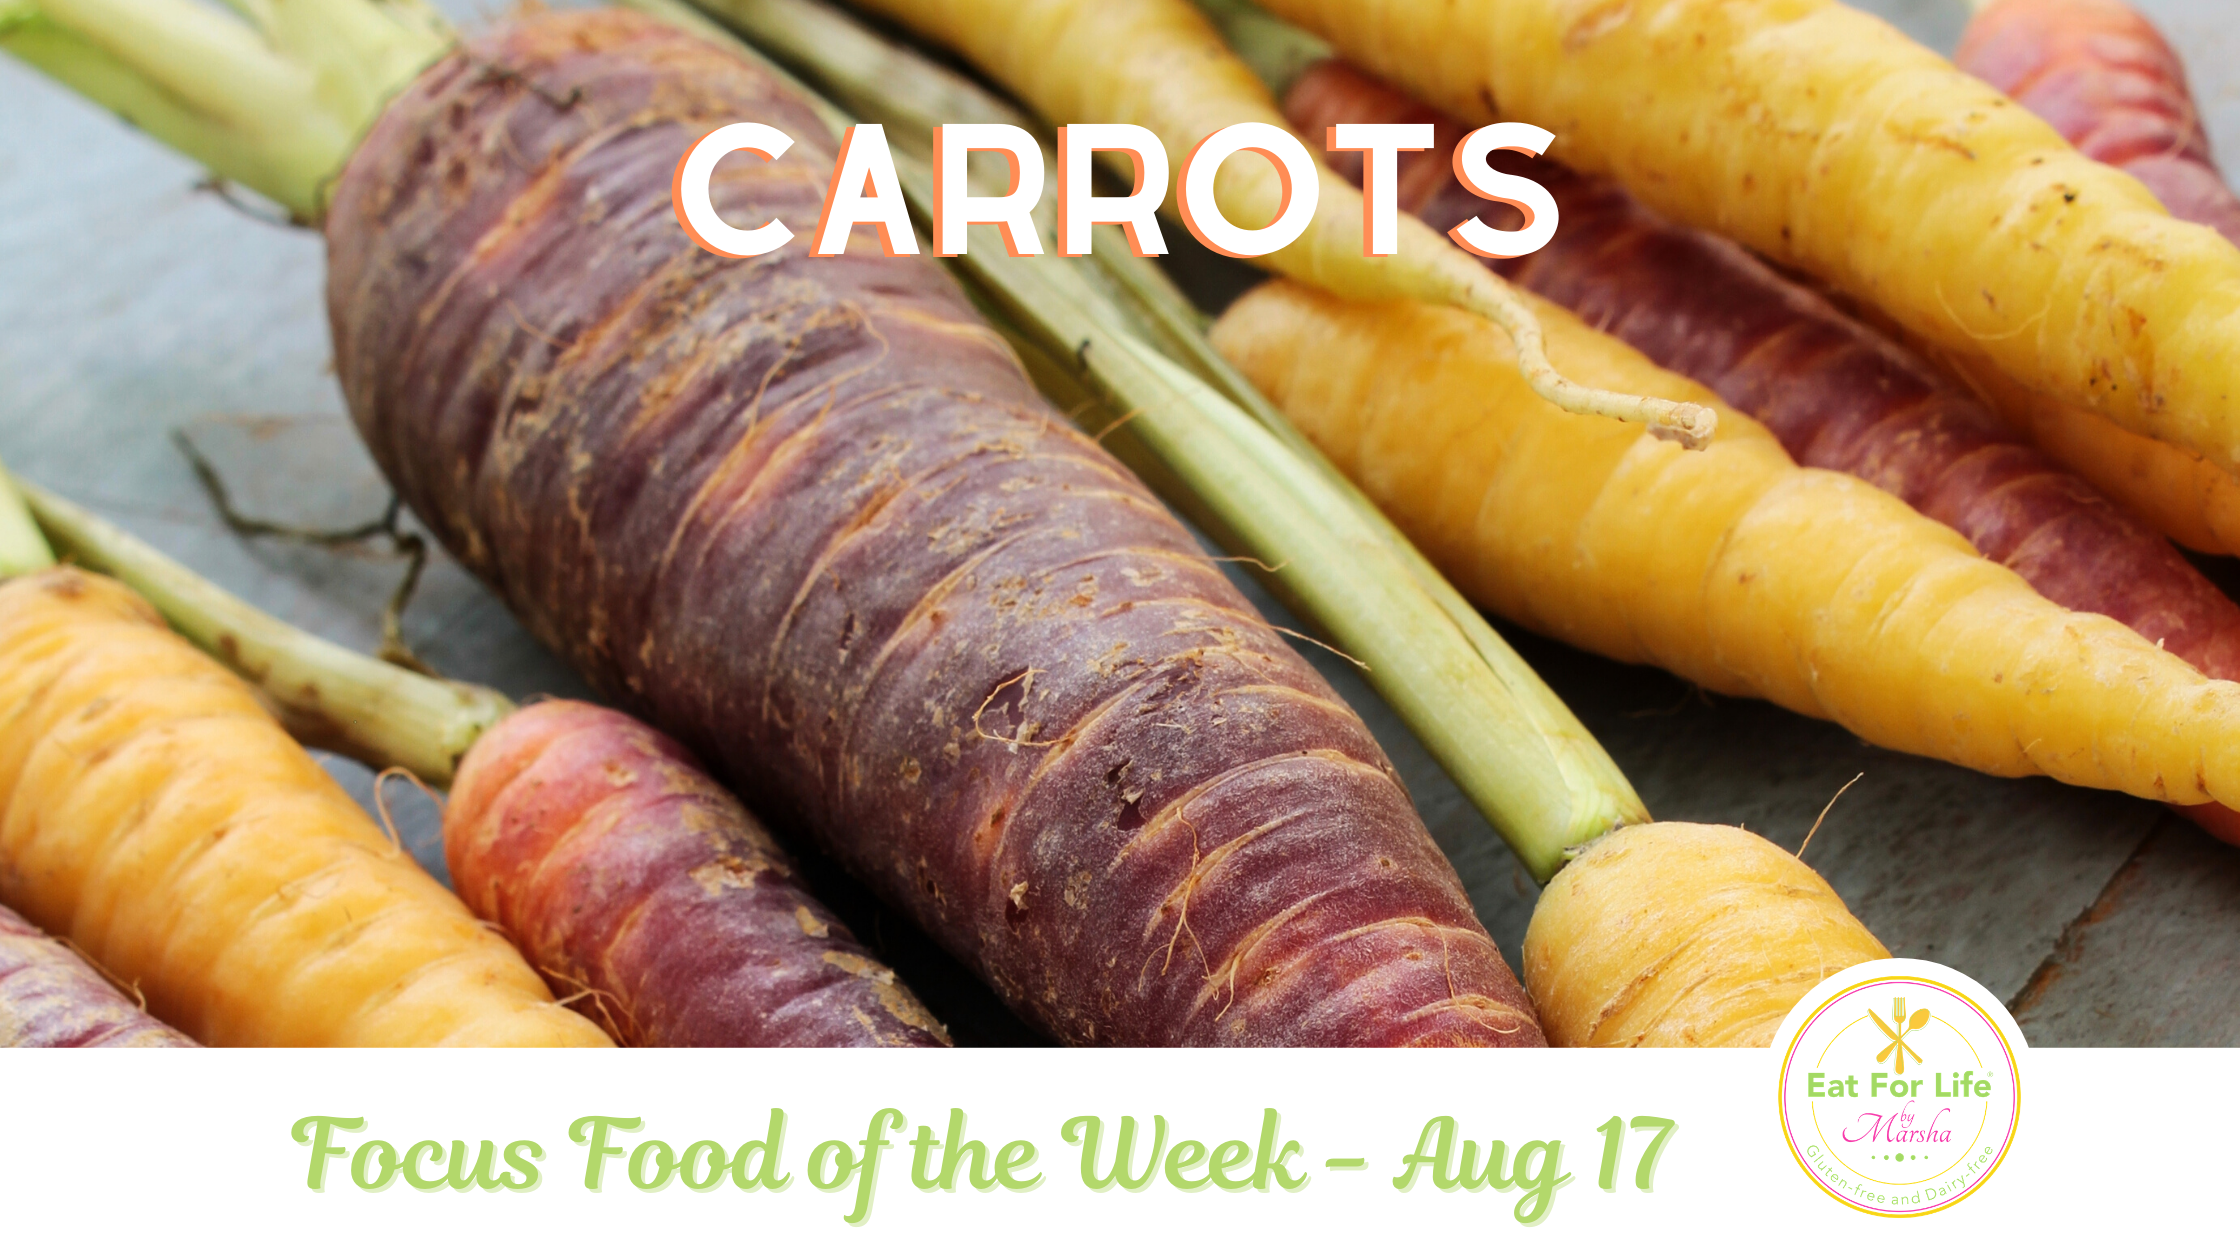 Carrots - Focus Food Of The Week For August 17, 2020